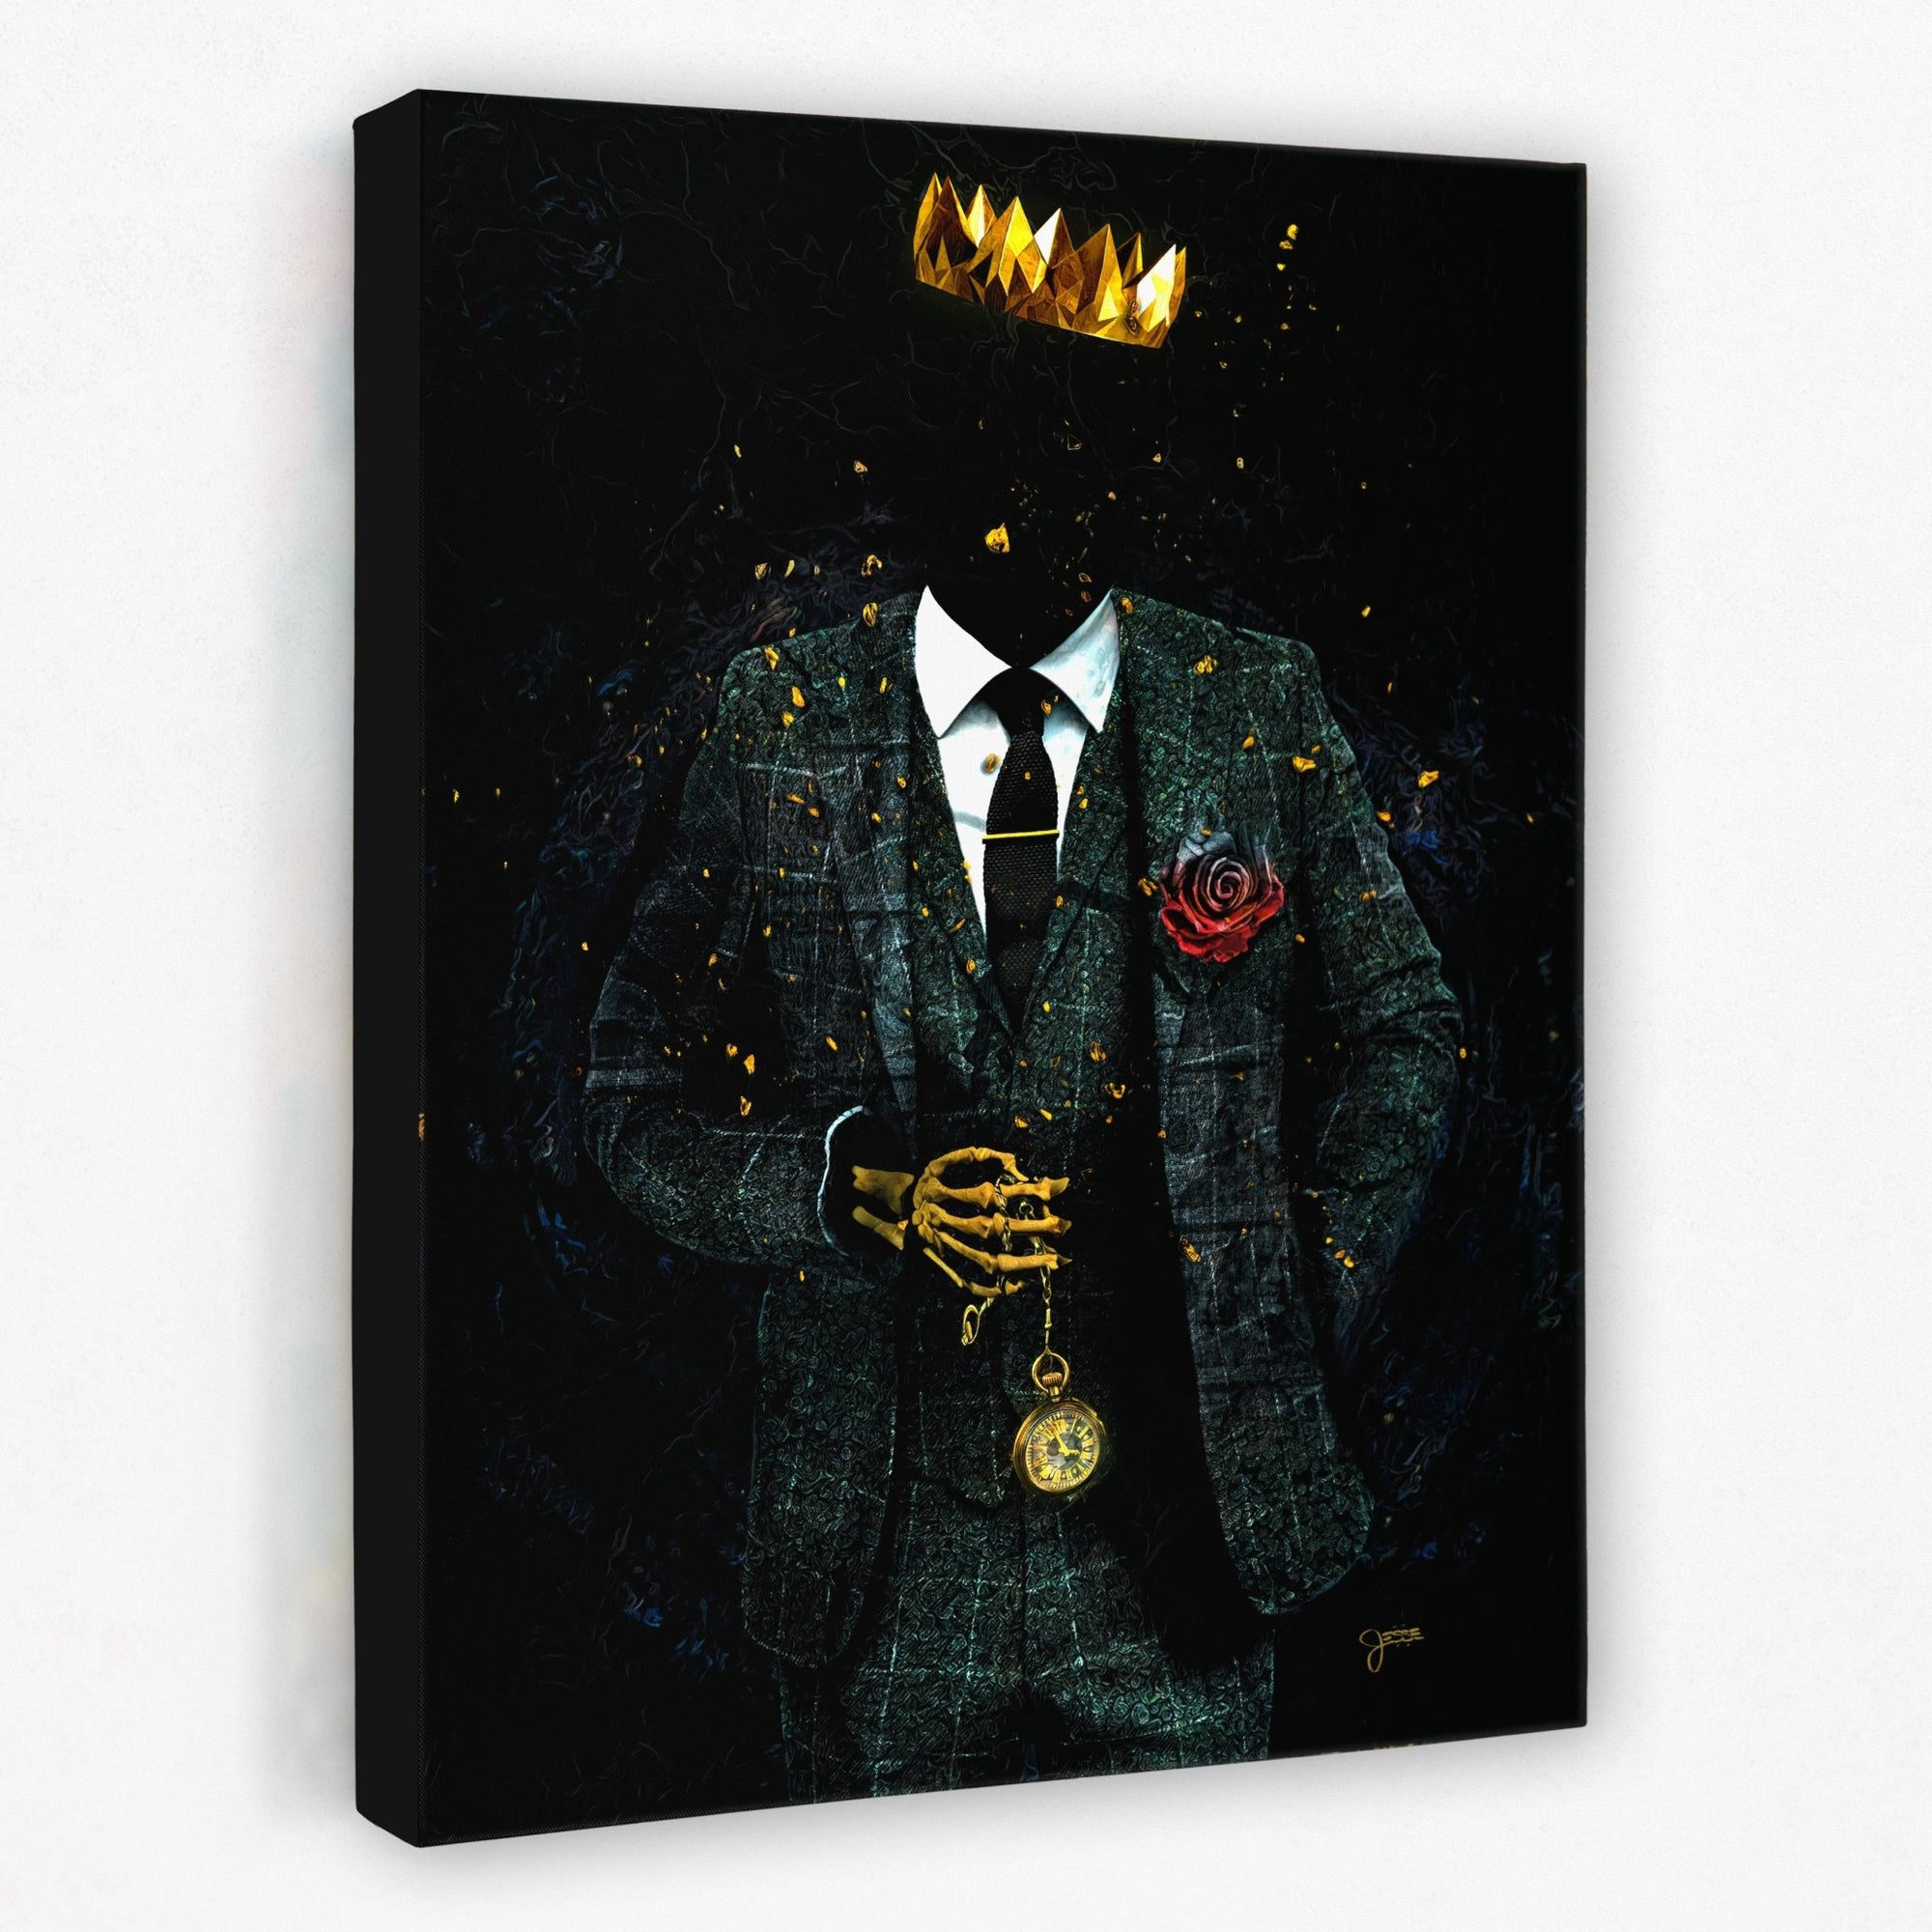 Time is King - Thedopeart Canvas